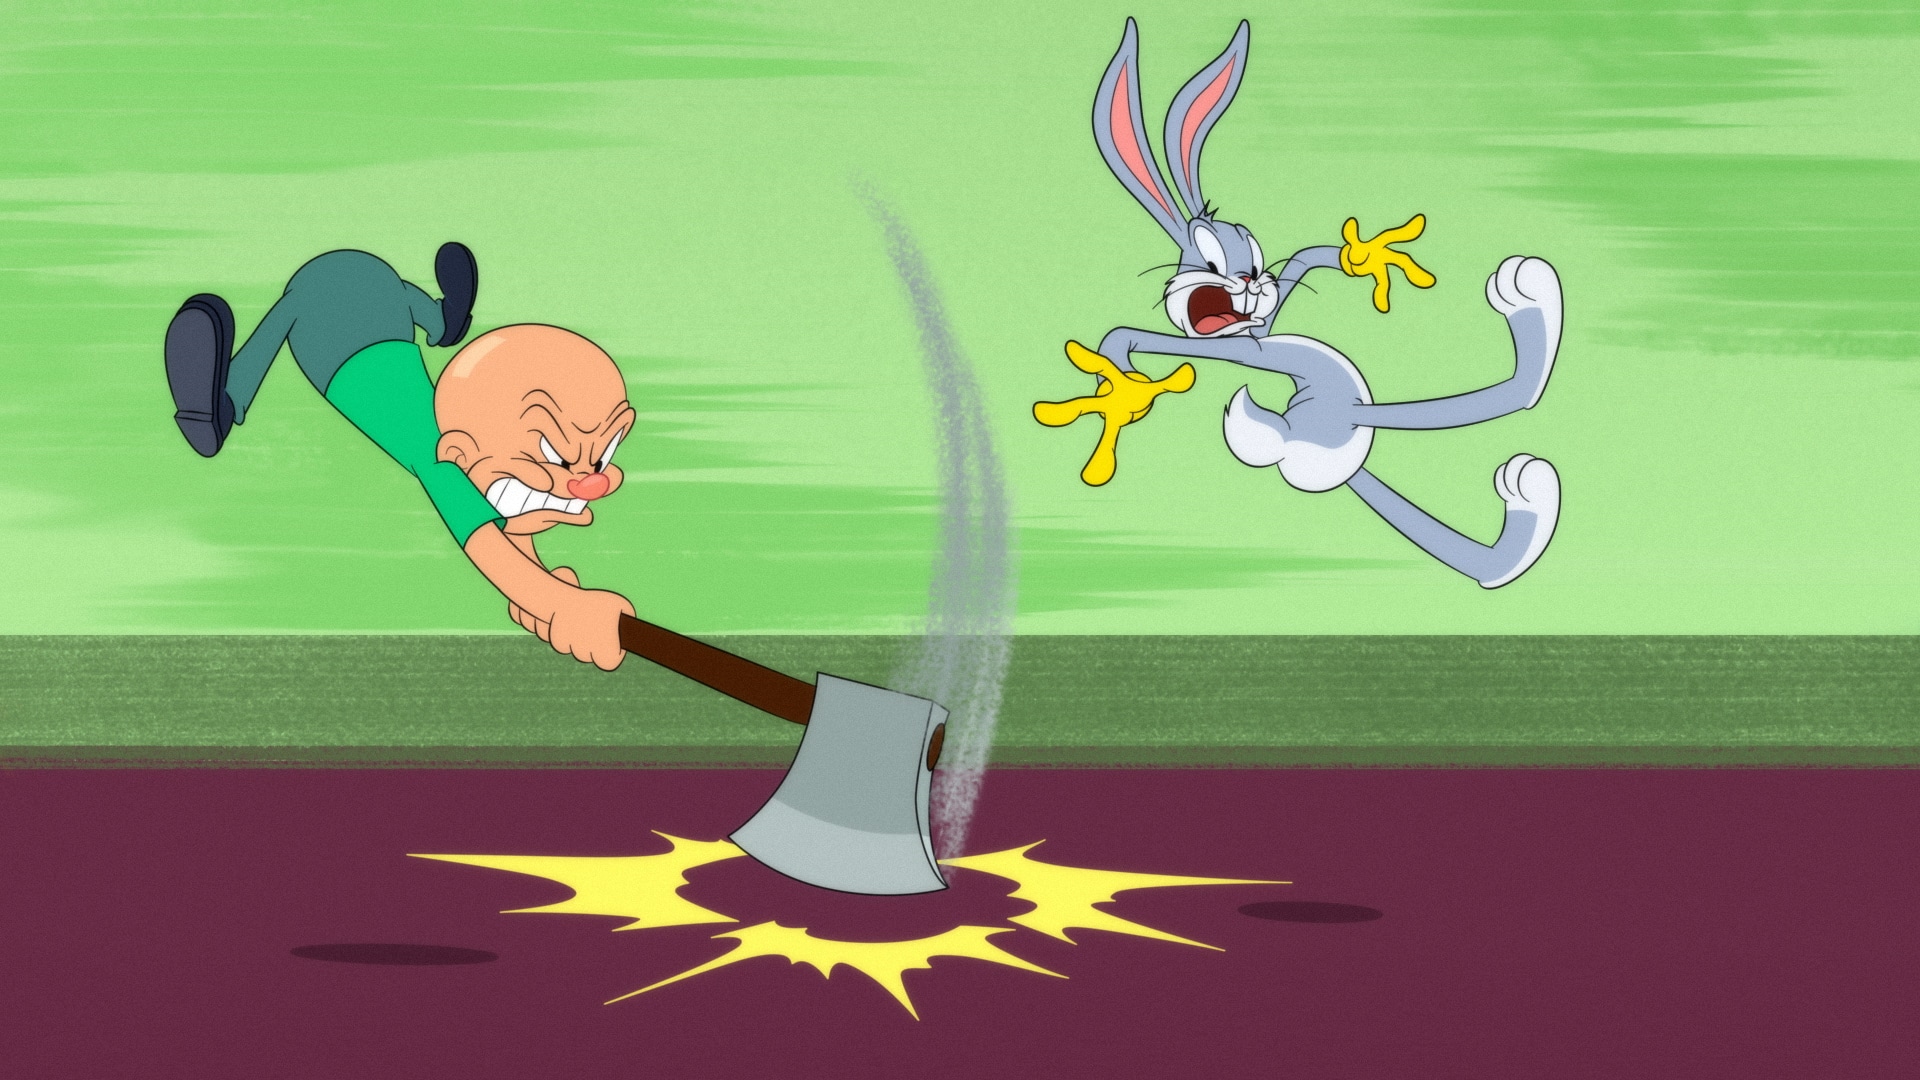 Awesome 1st Trailer For Looney Tunes Cartoons On HBO Max Is Here!